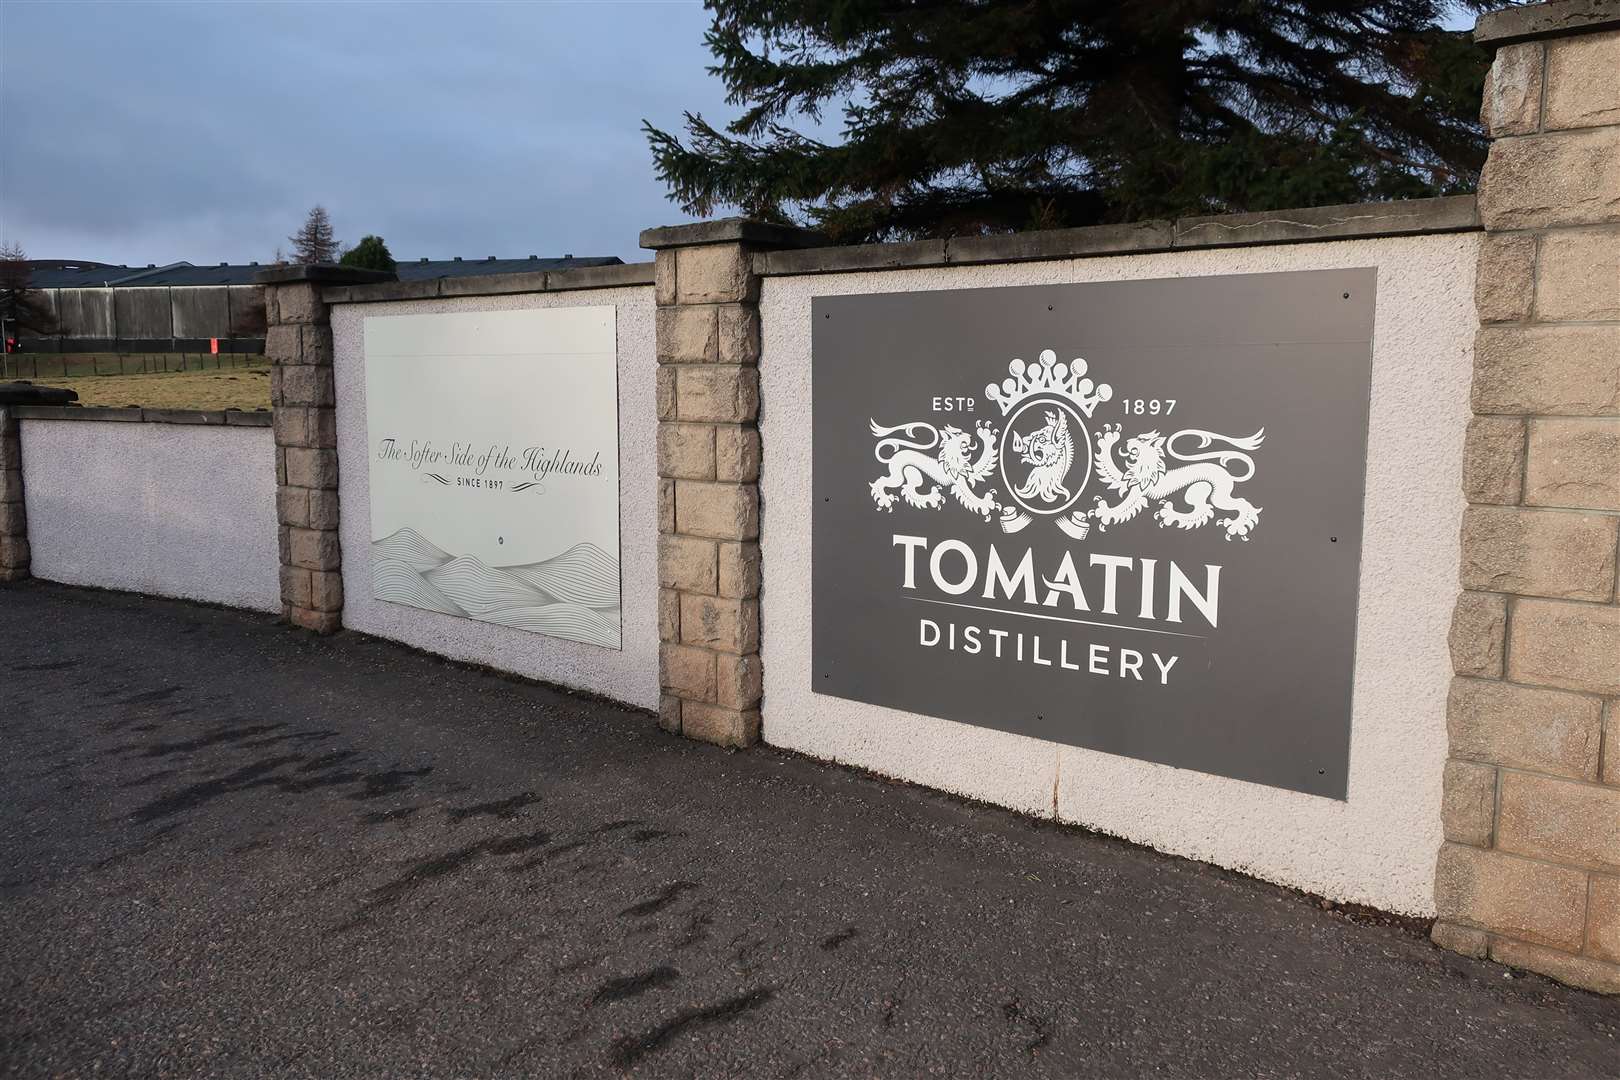 The Court of Session hearing was brought by Tomatin Distillery over potential confusion over use of the village name by the new development.